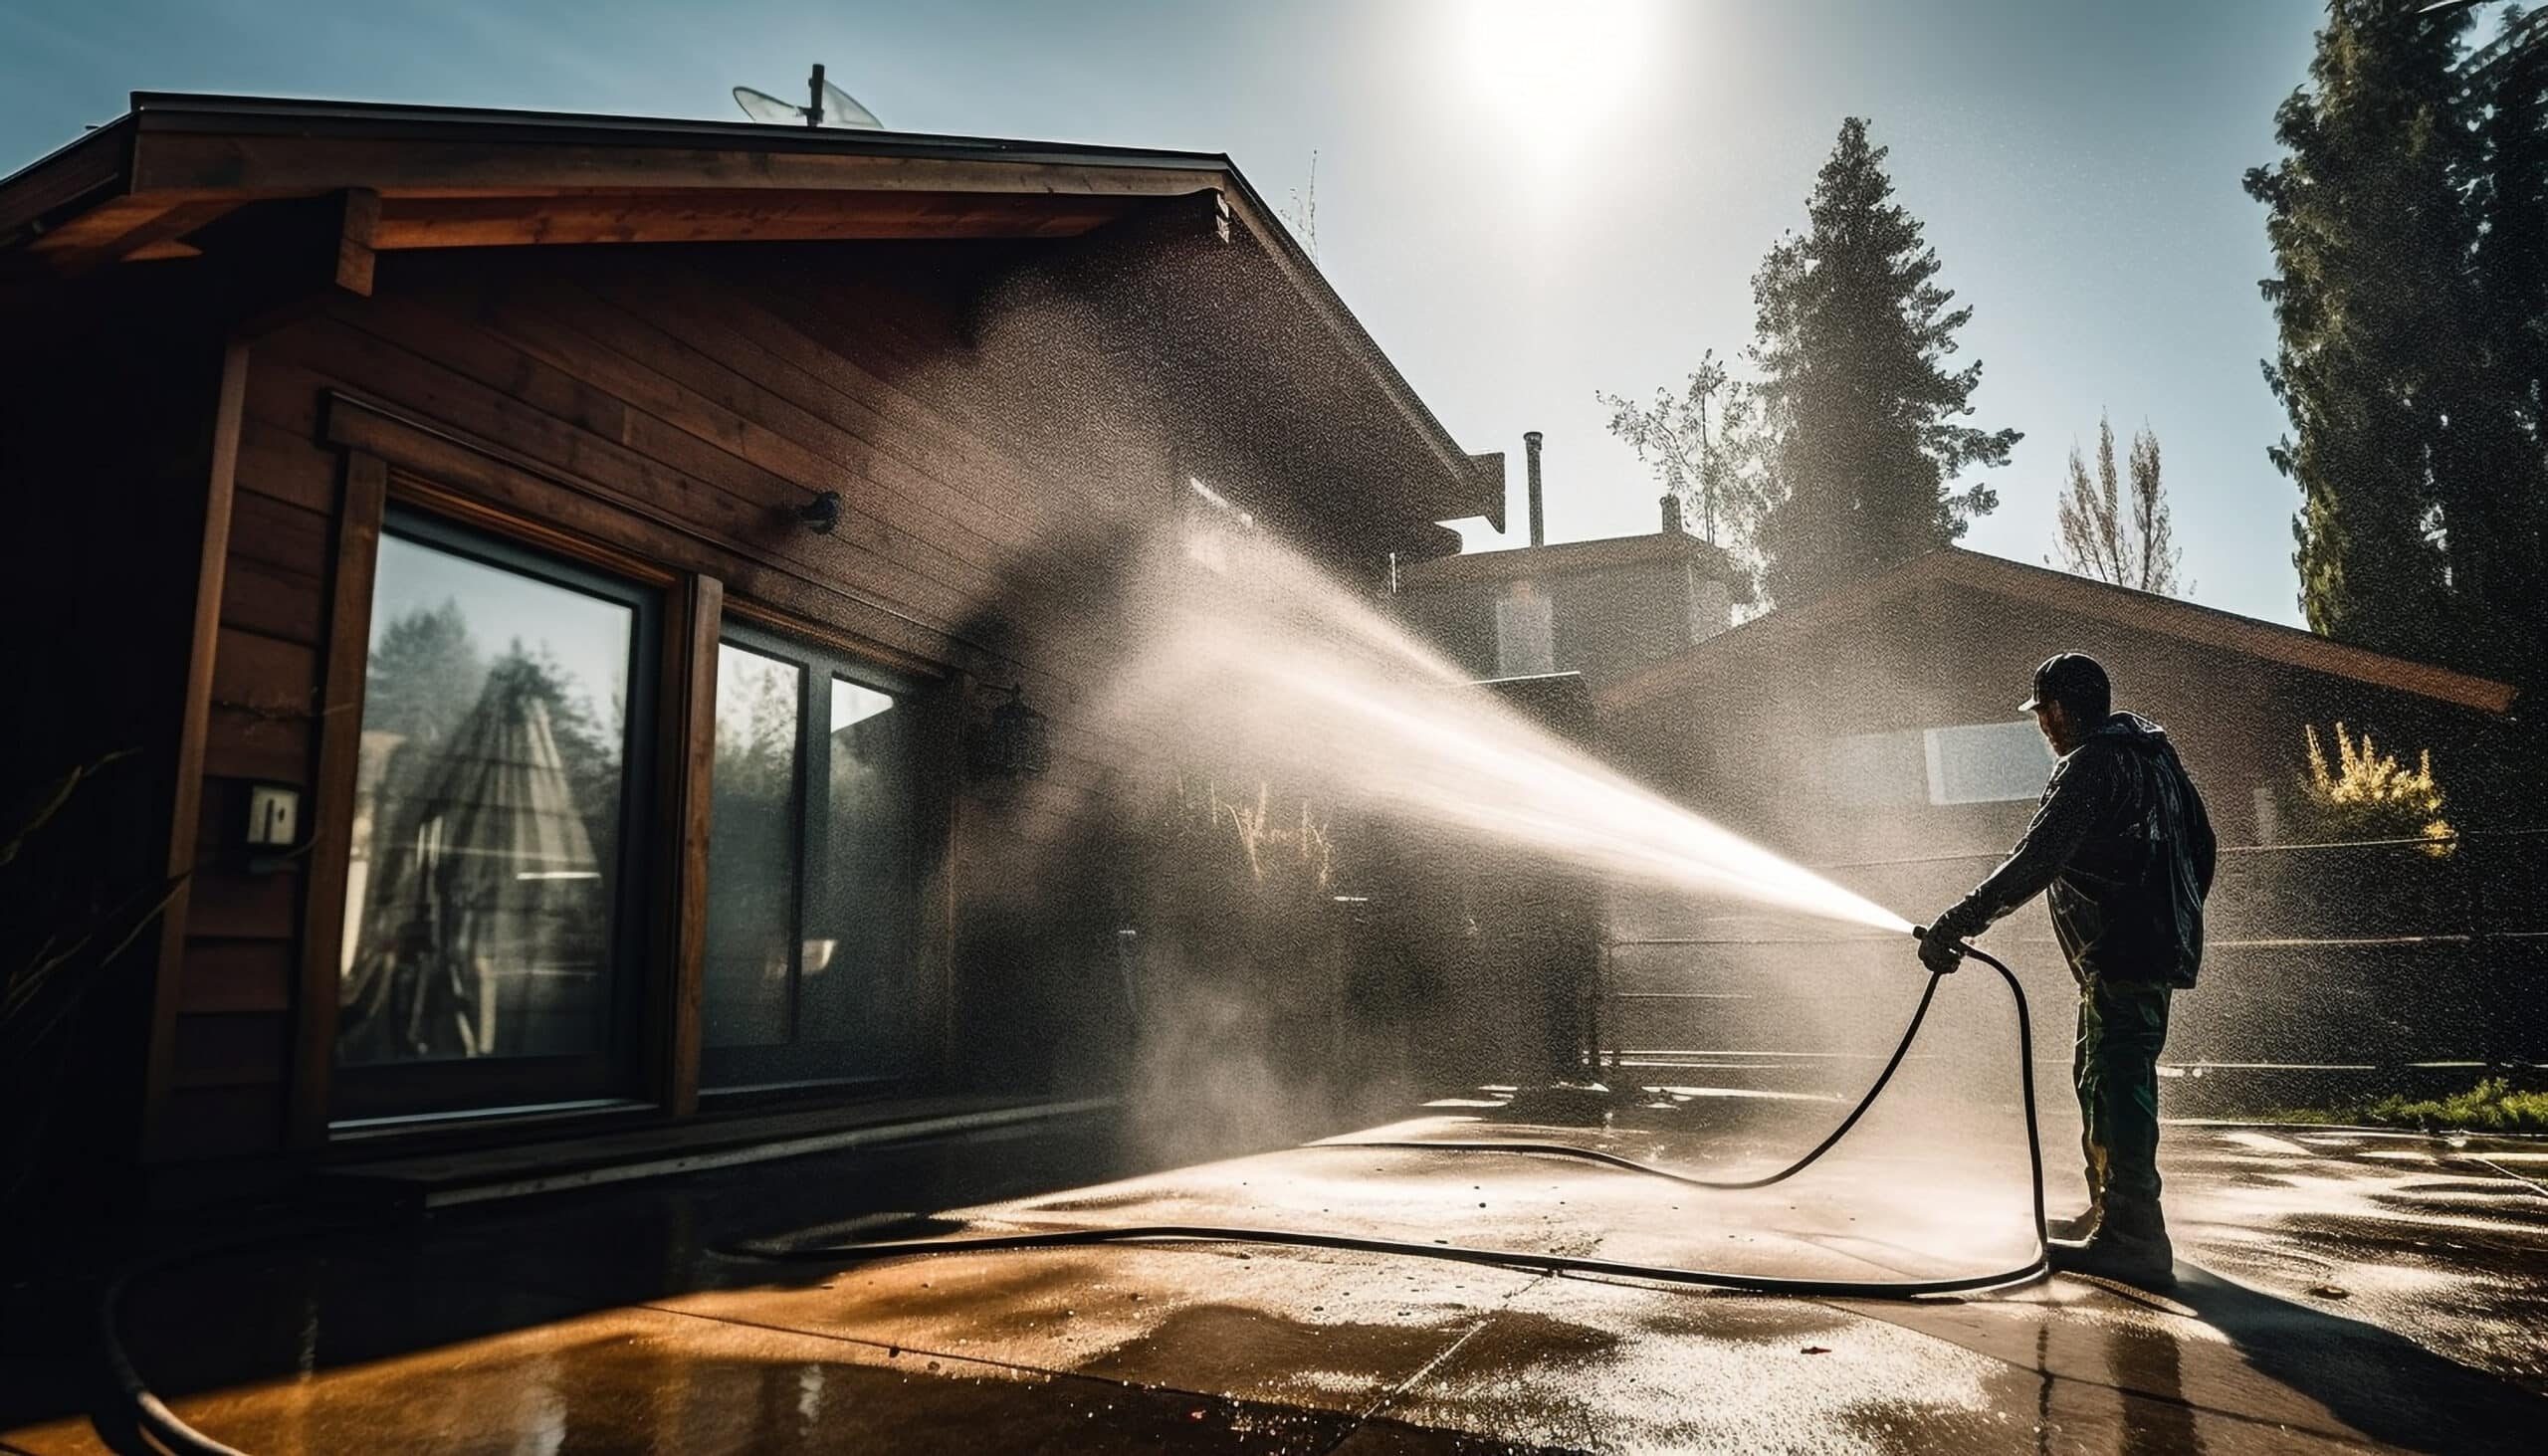 www.appr.com : How do I choose the right pressure washer for my home?